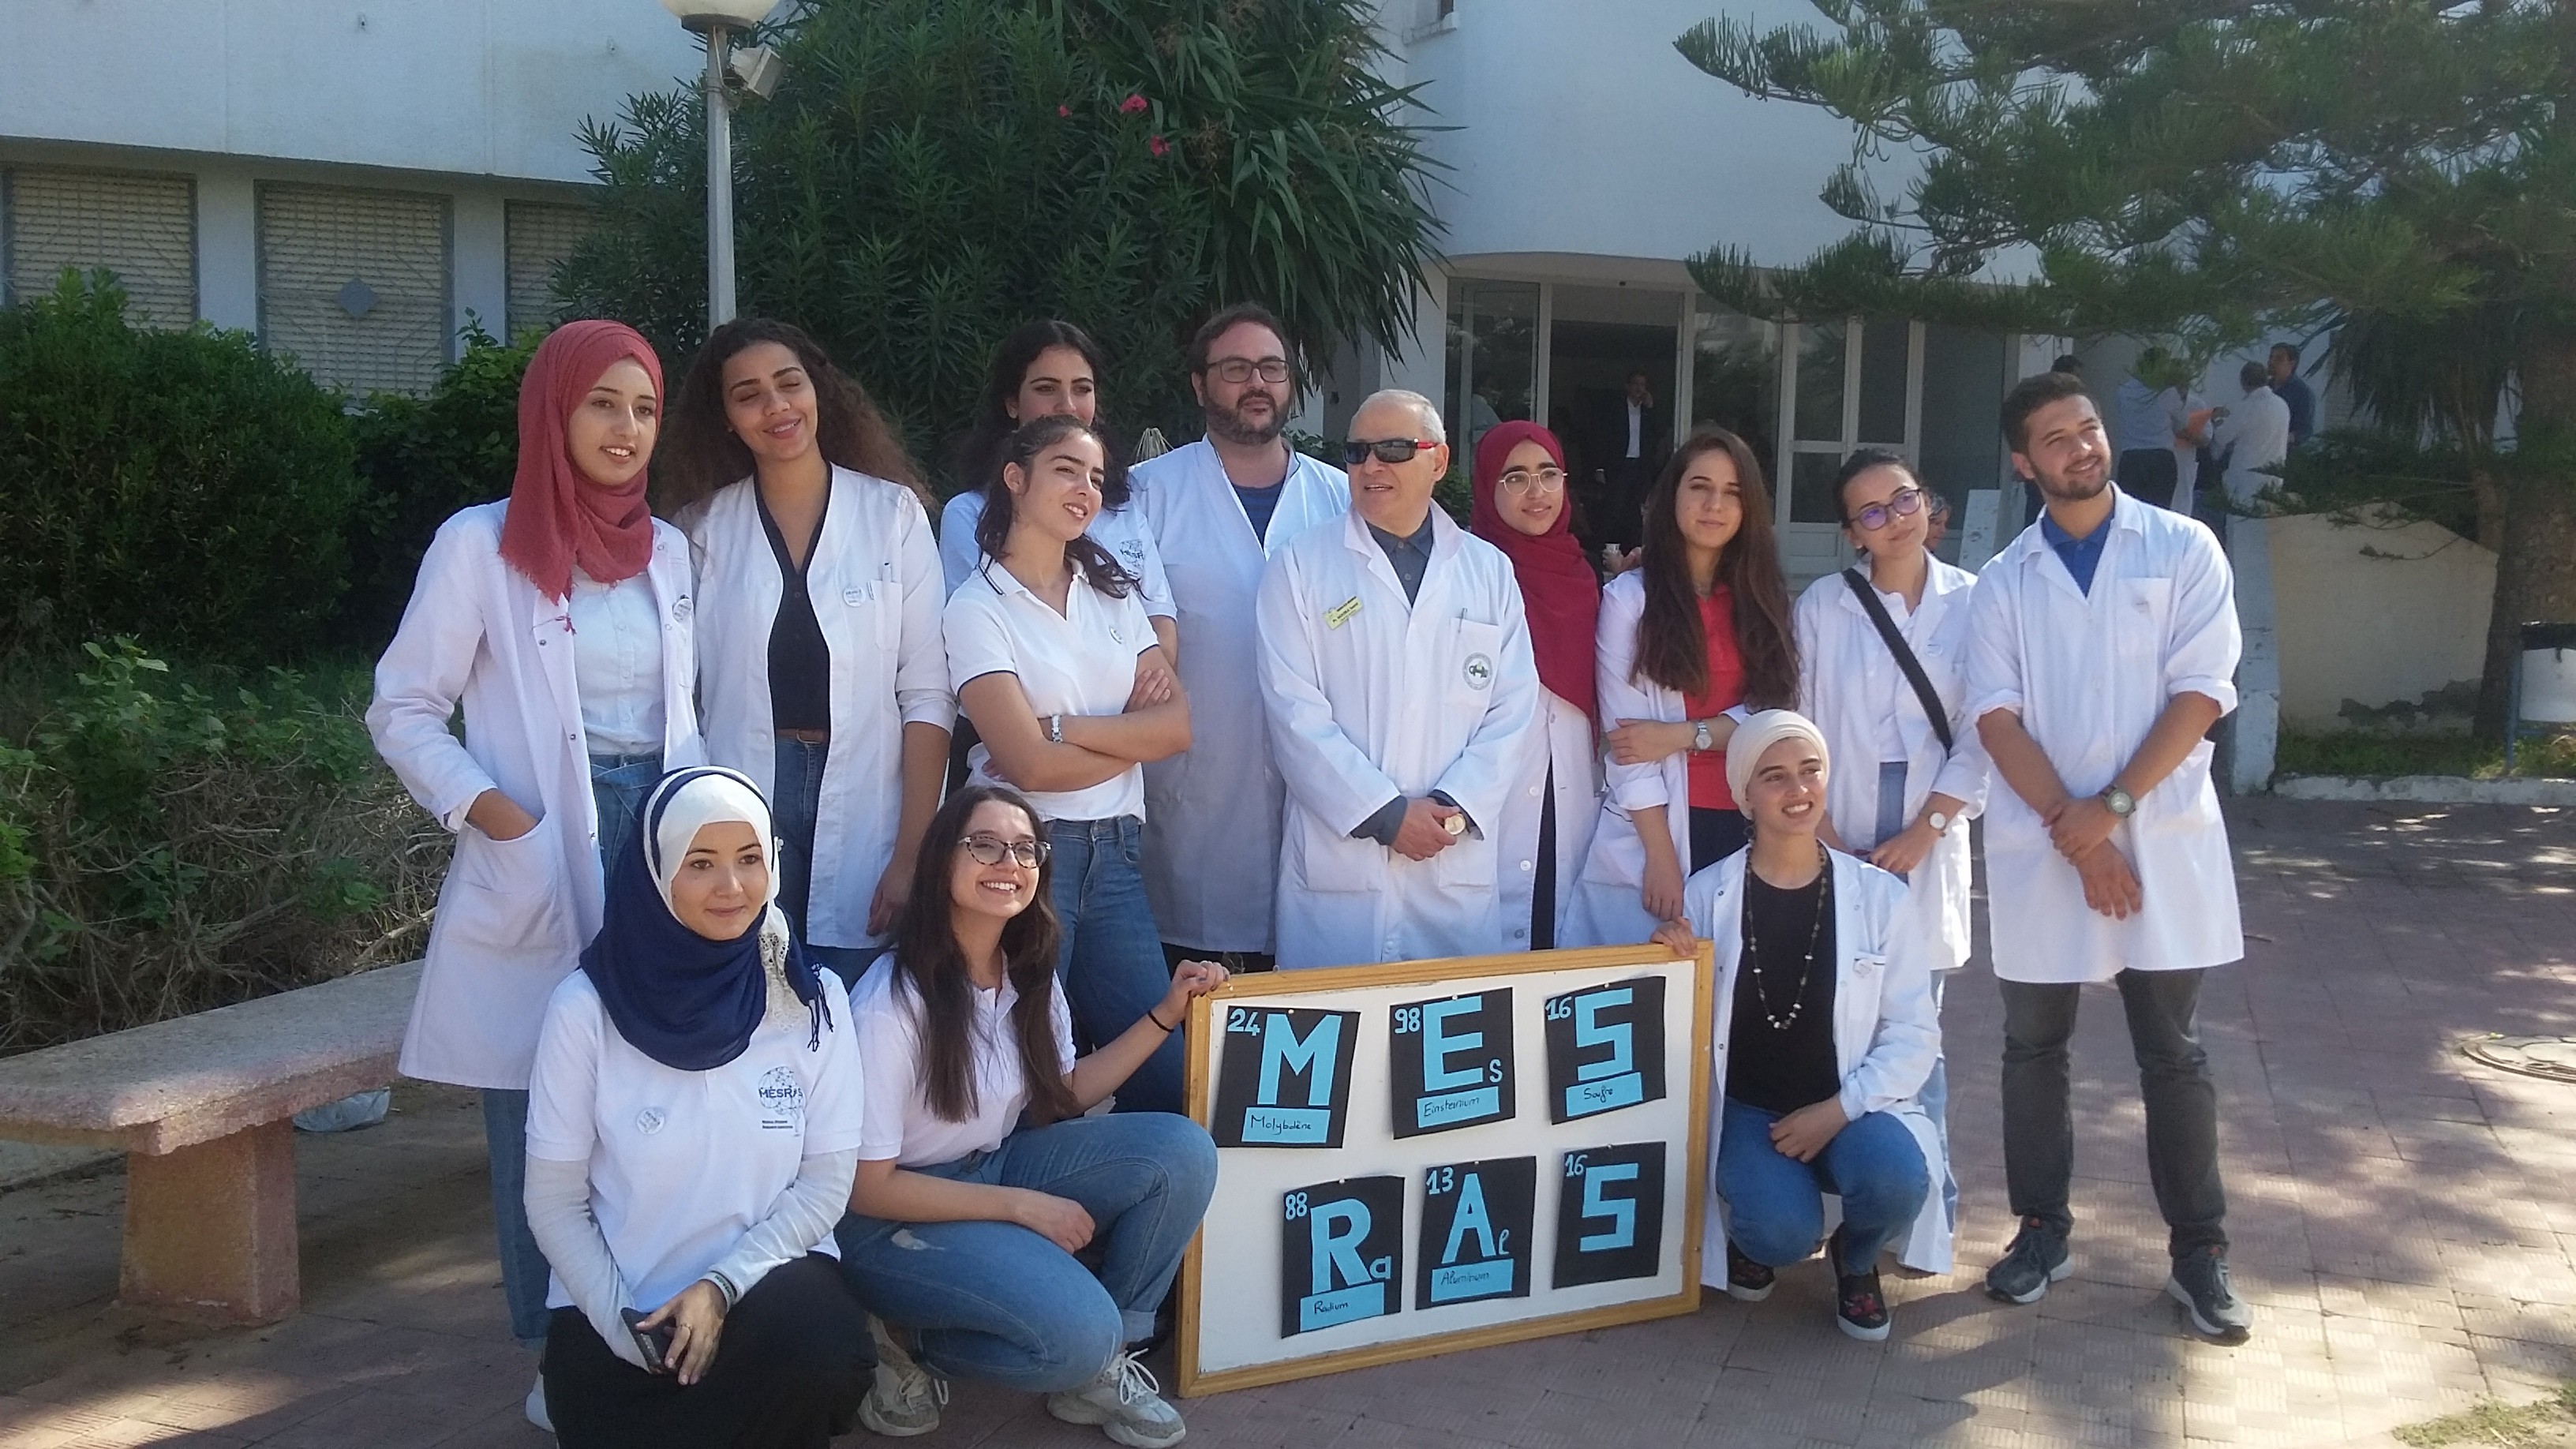 MEDICAL STUDENTS' RESEARCH ASSOCIATION 